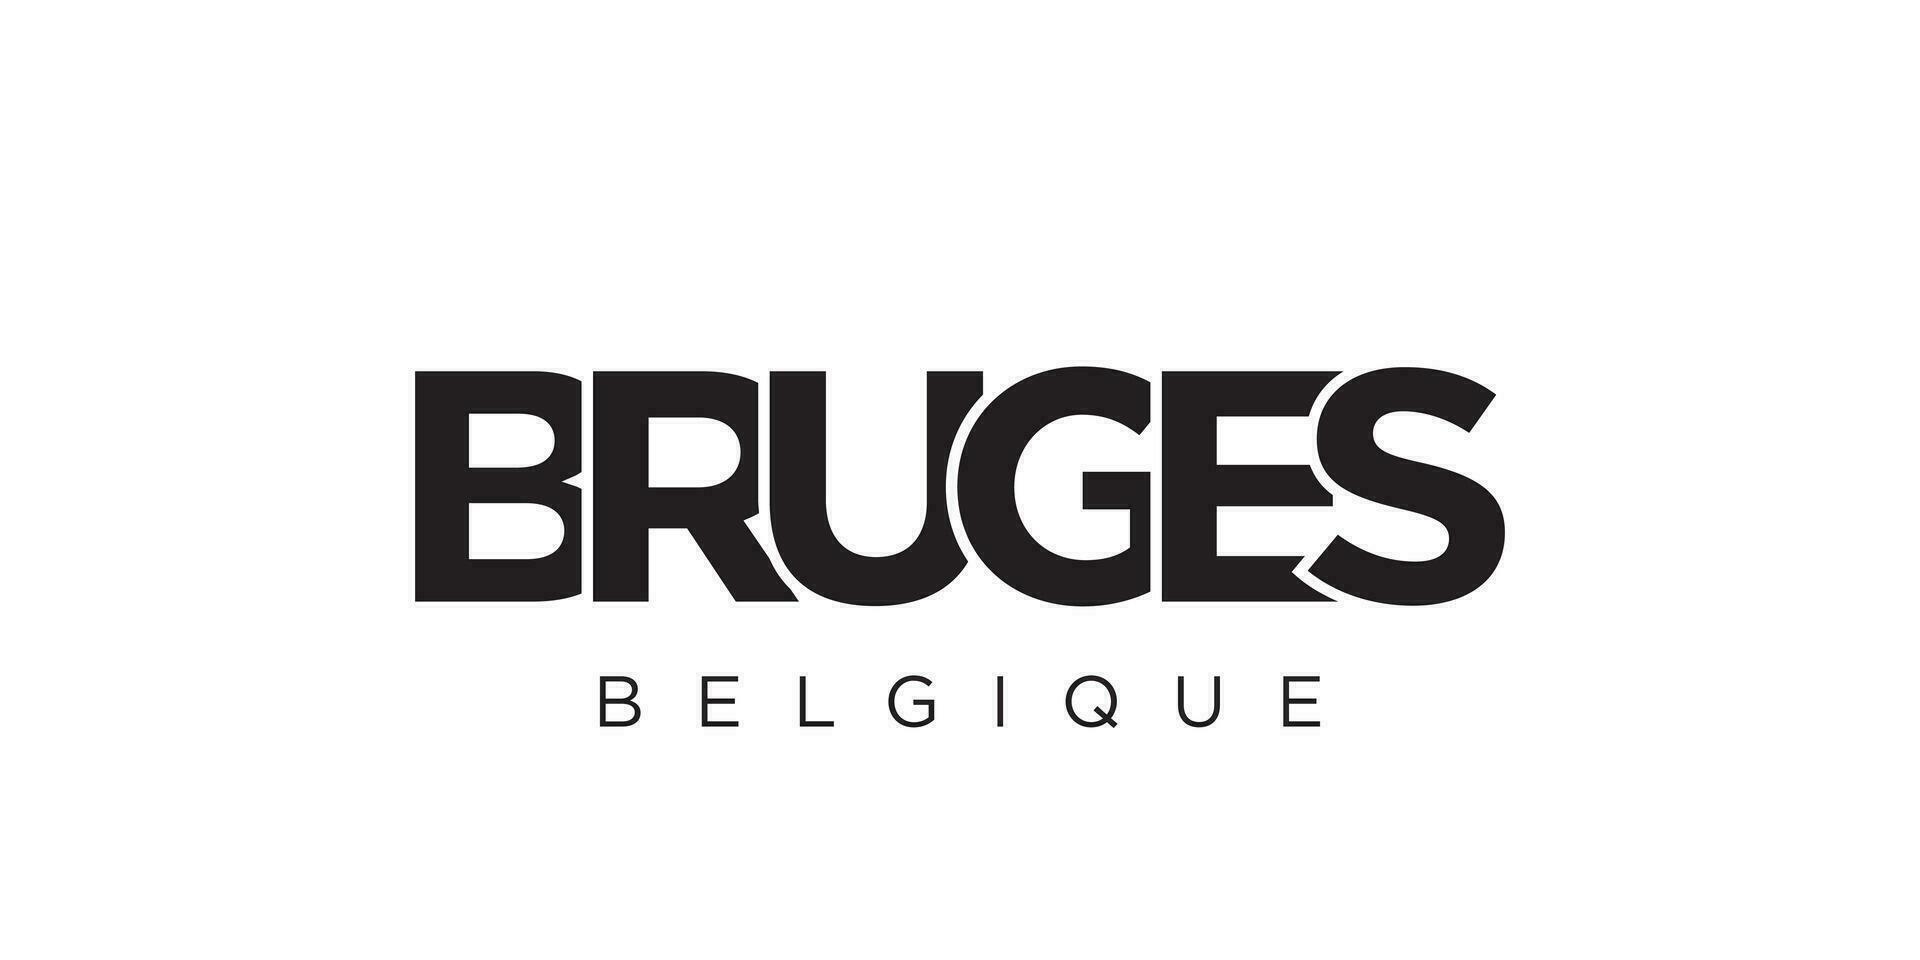 Bruges in the Belgium emblem. The design features a geometric style, vector illustration with bold typography in a modern font. The graphic slogan lettering.